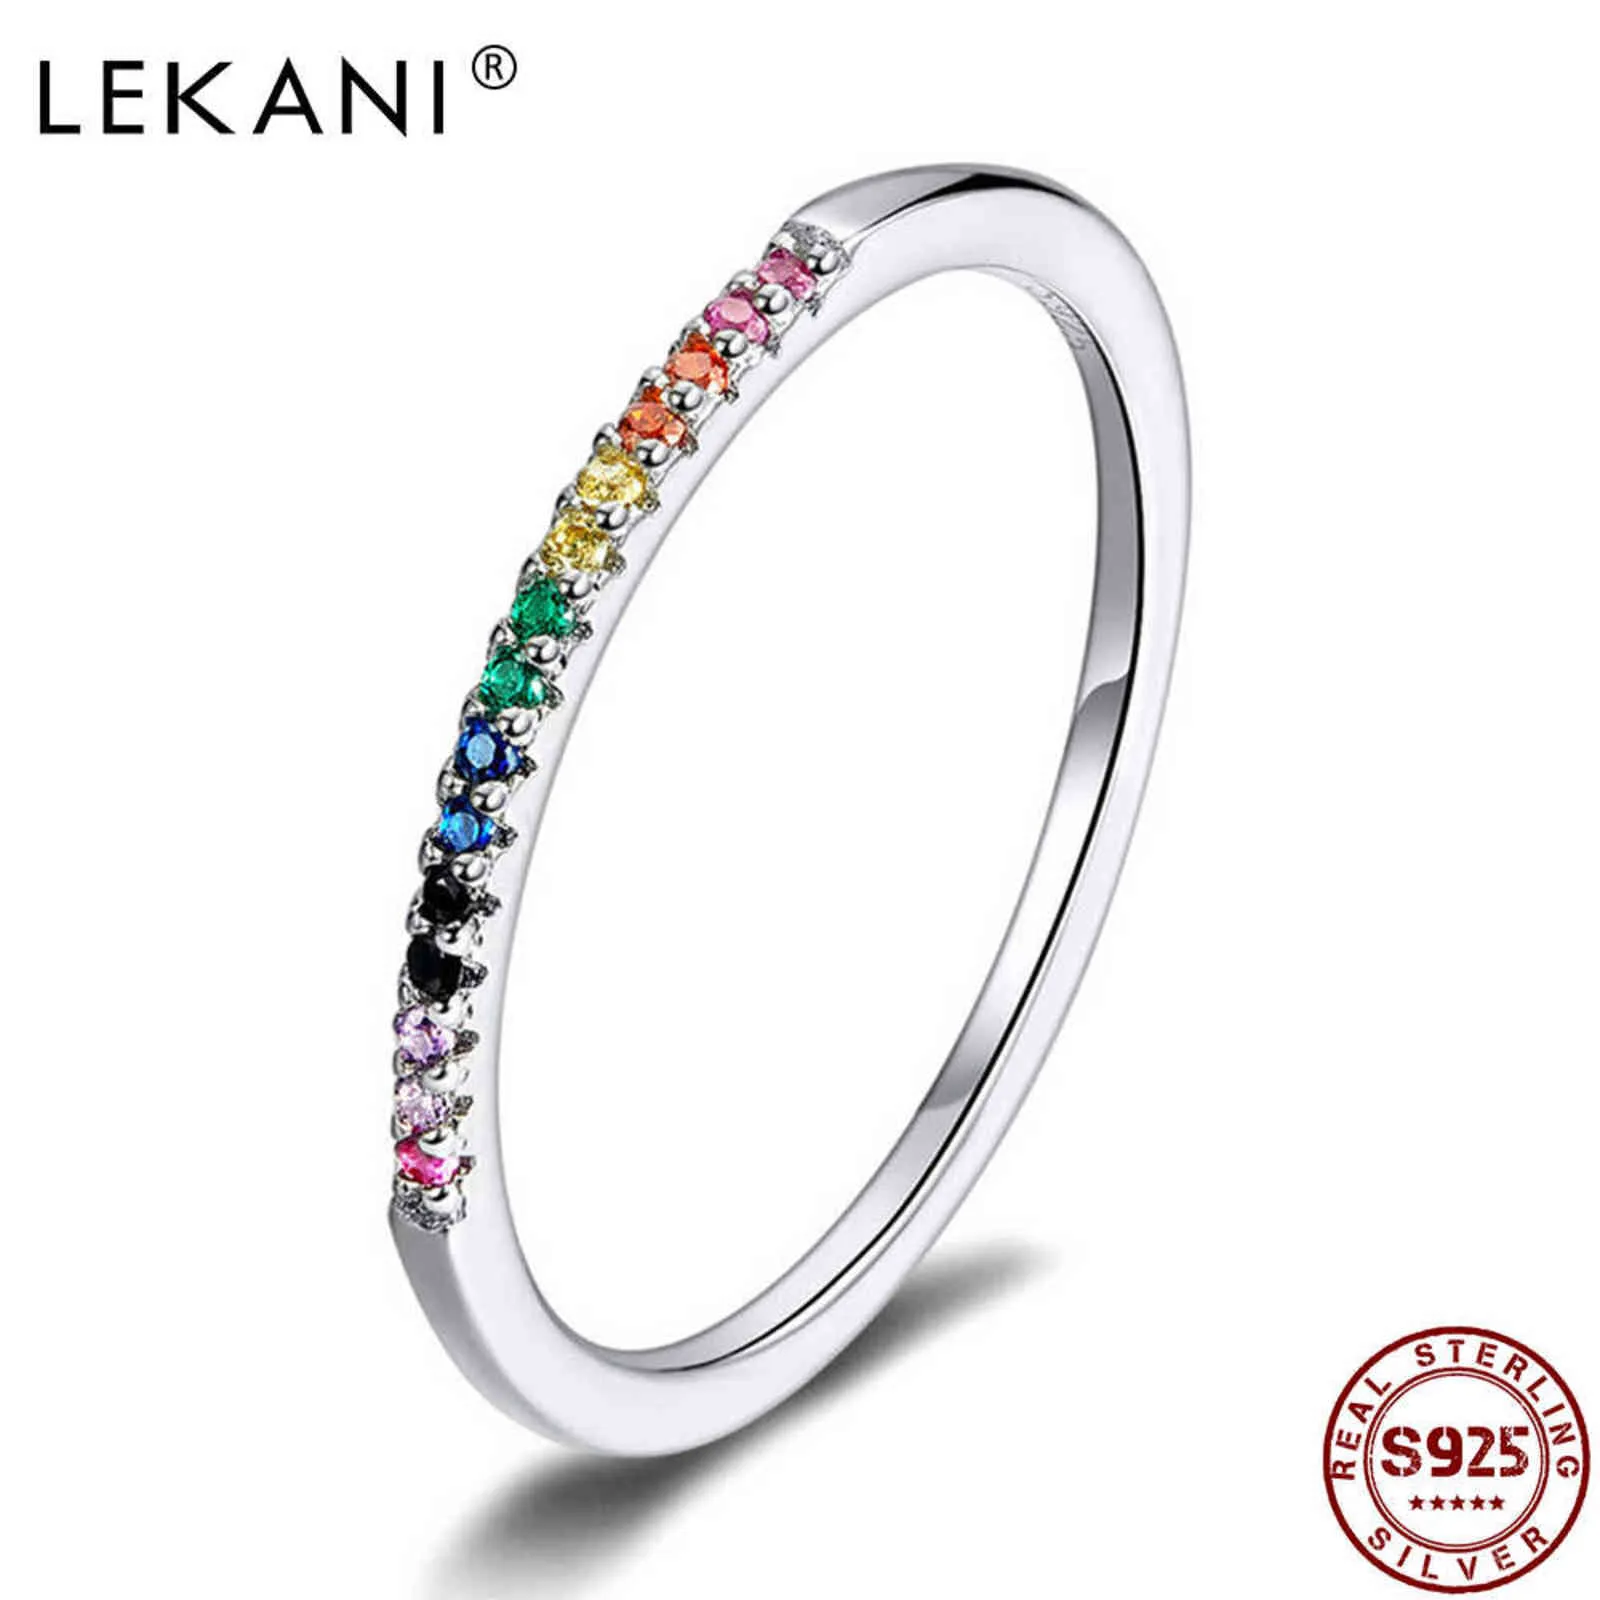 Lekani Rainbow Color Finger Rings for Women Stackable Match Joker Wedding Ring Sterling Silver 925 Jewelry Gifts for Friends